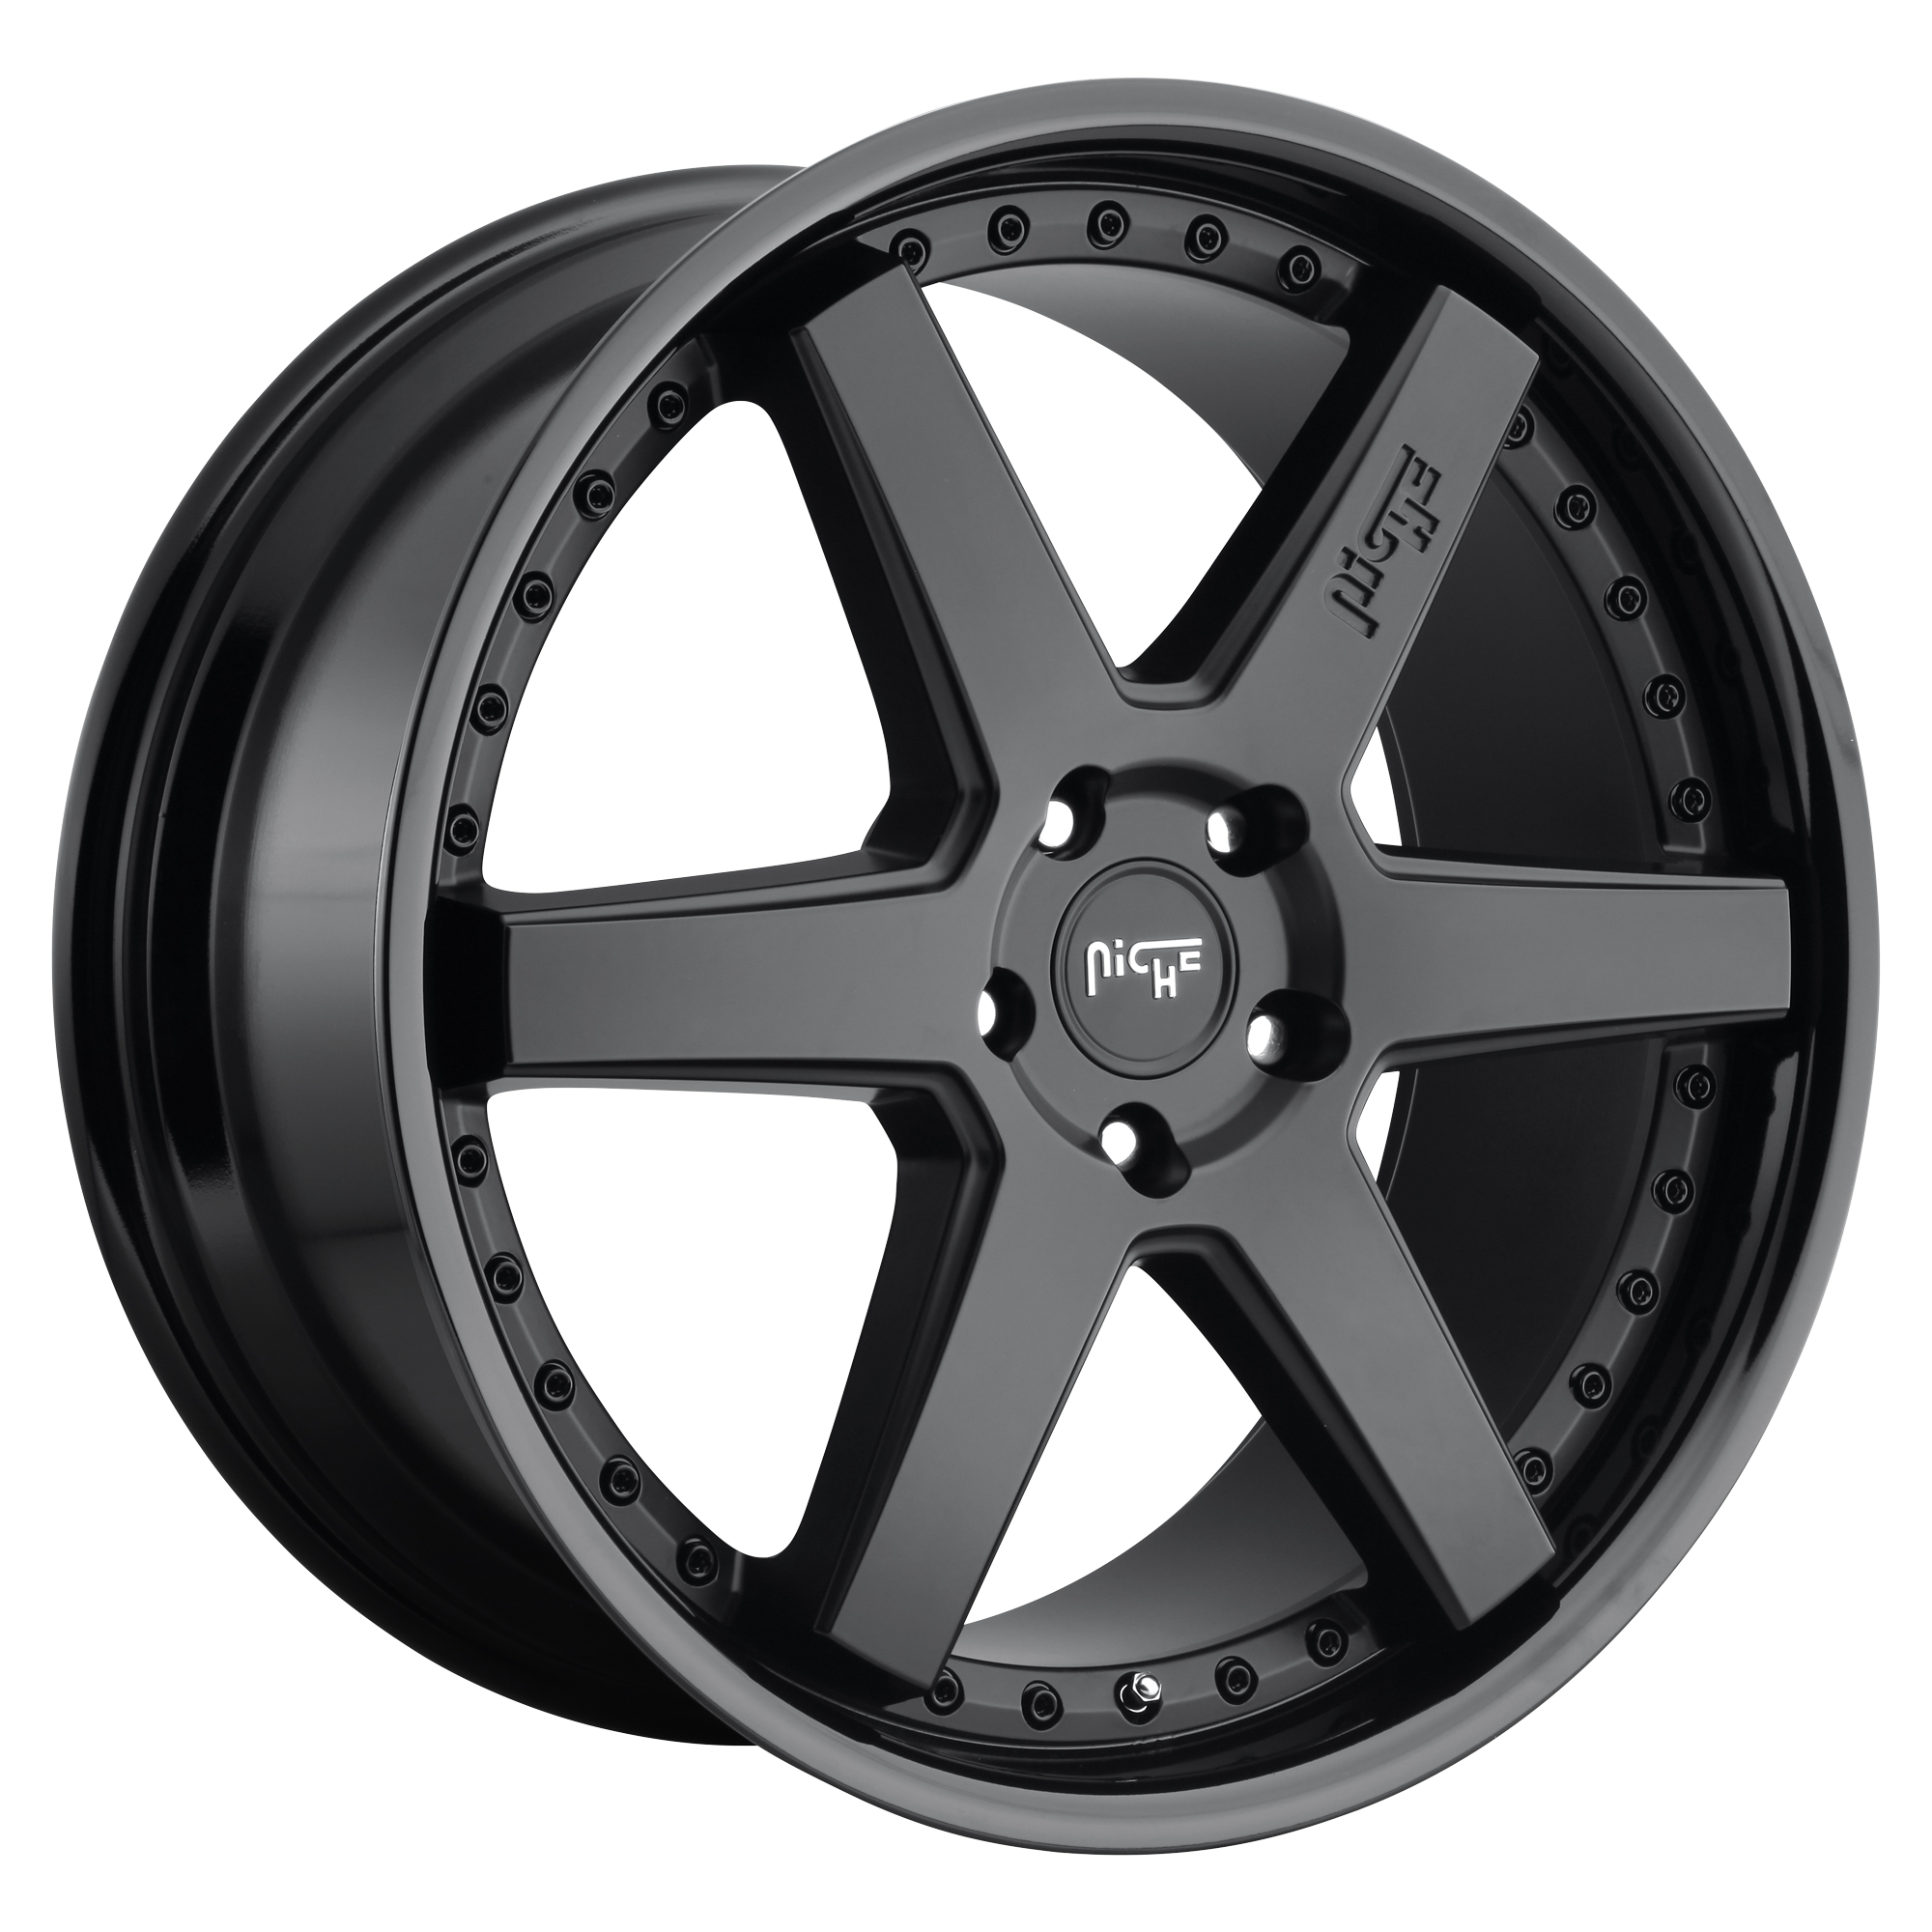 ALTAIR 19x8.5 5x120.00 GLOSS BLACK MATTE BLACK (35 mm) - Tires and Engine Performance